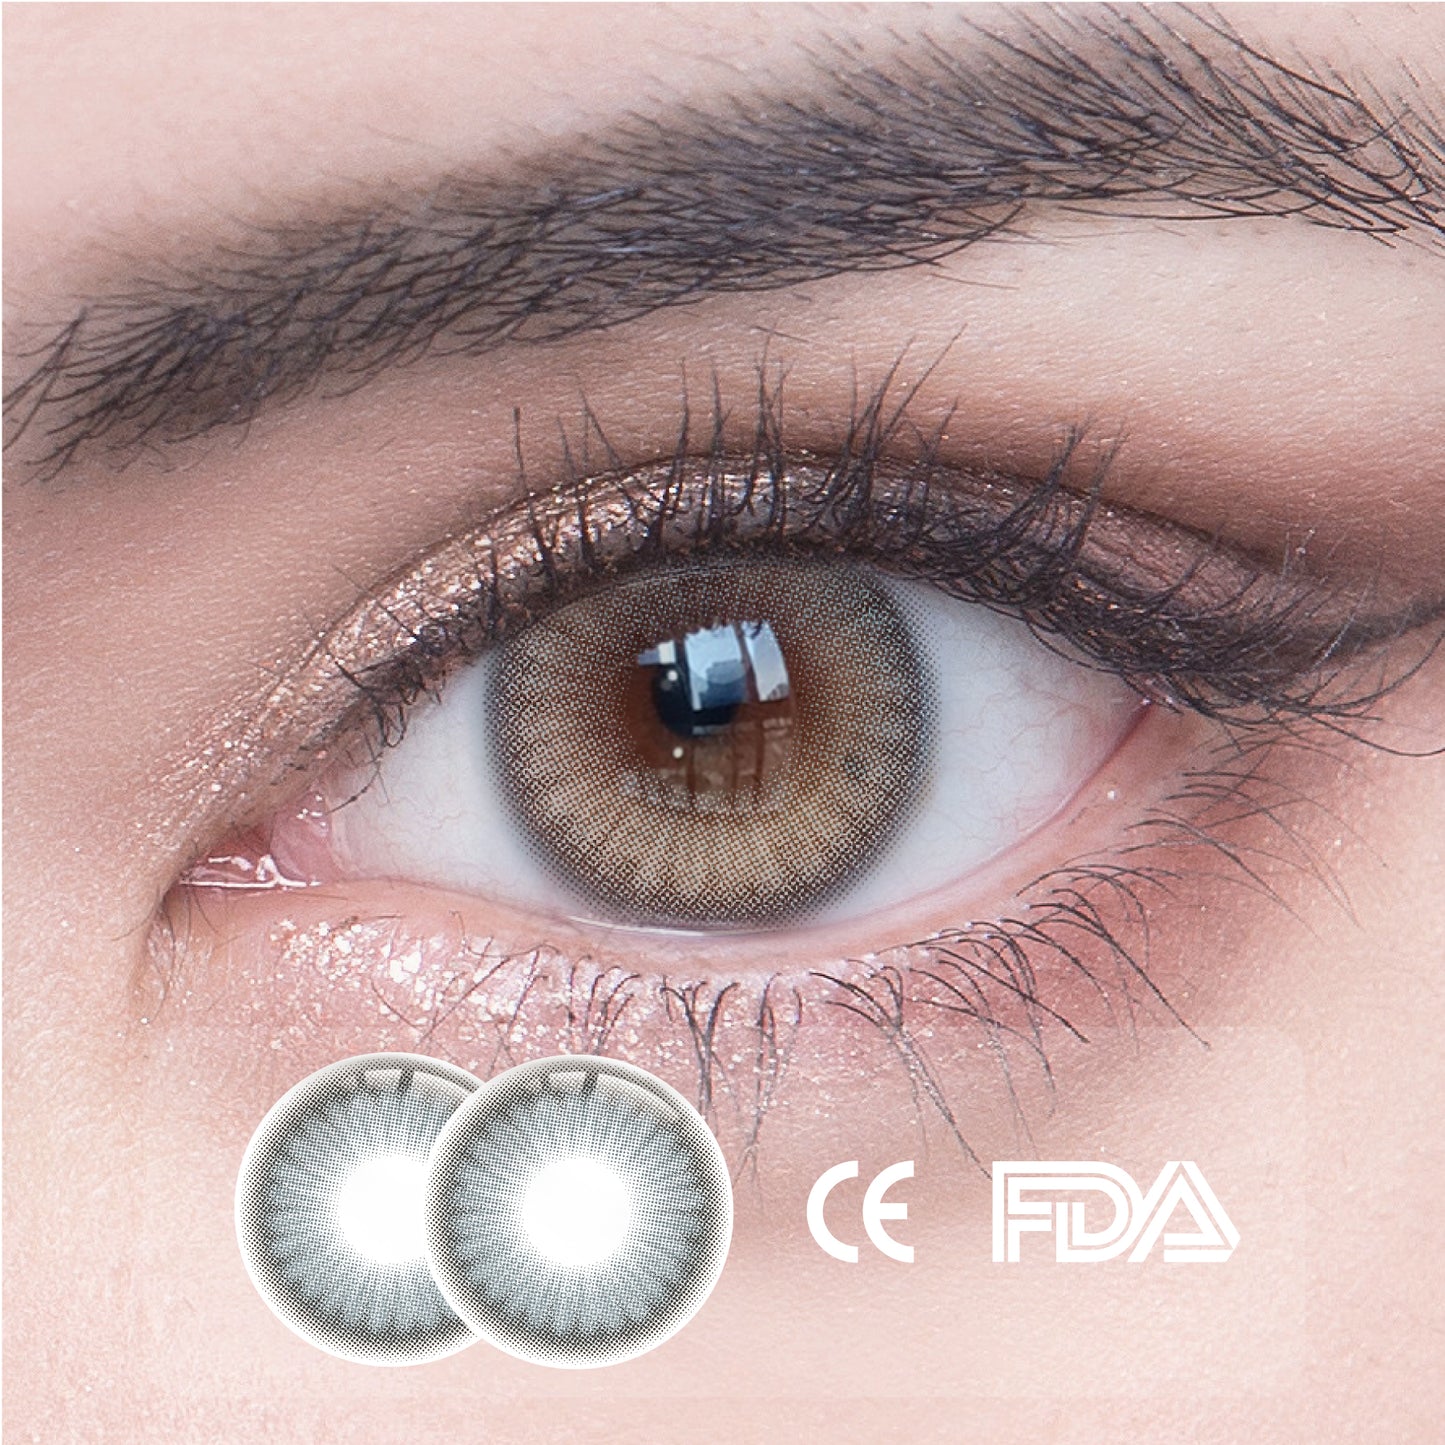 1pcs FDA Certificate Eyes Colorful Contact Lenses - Jazz green